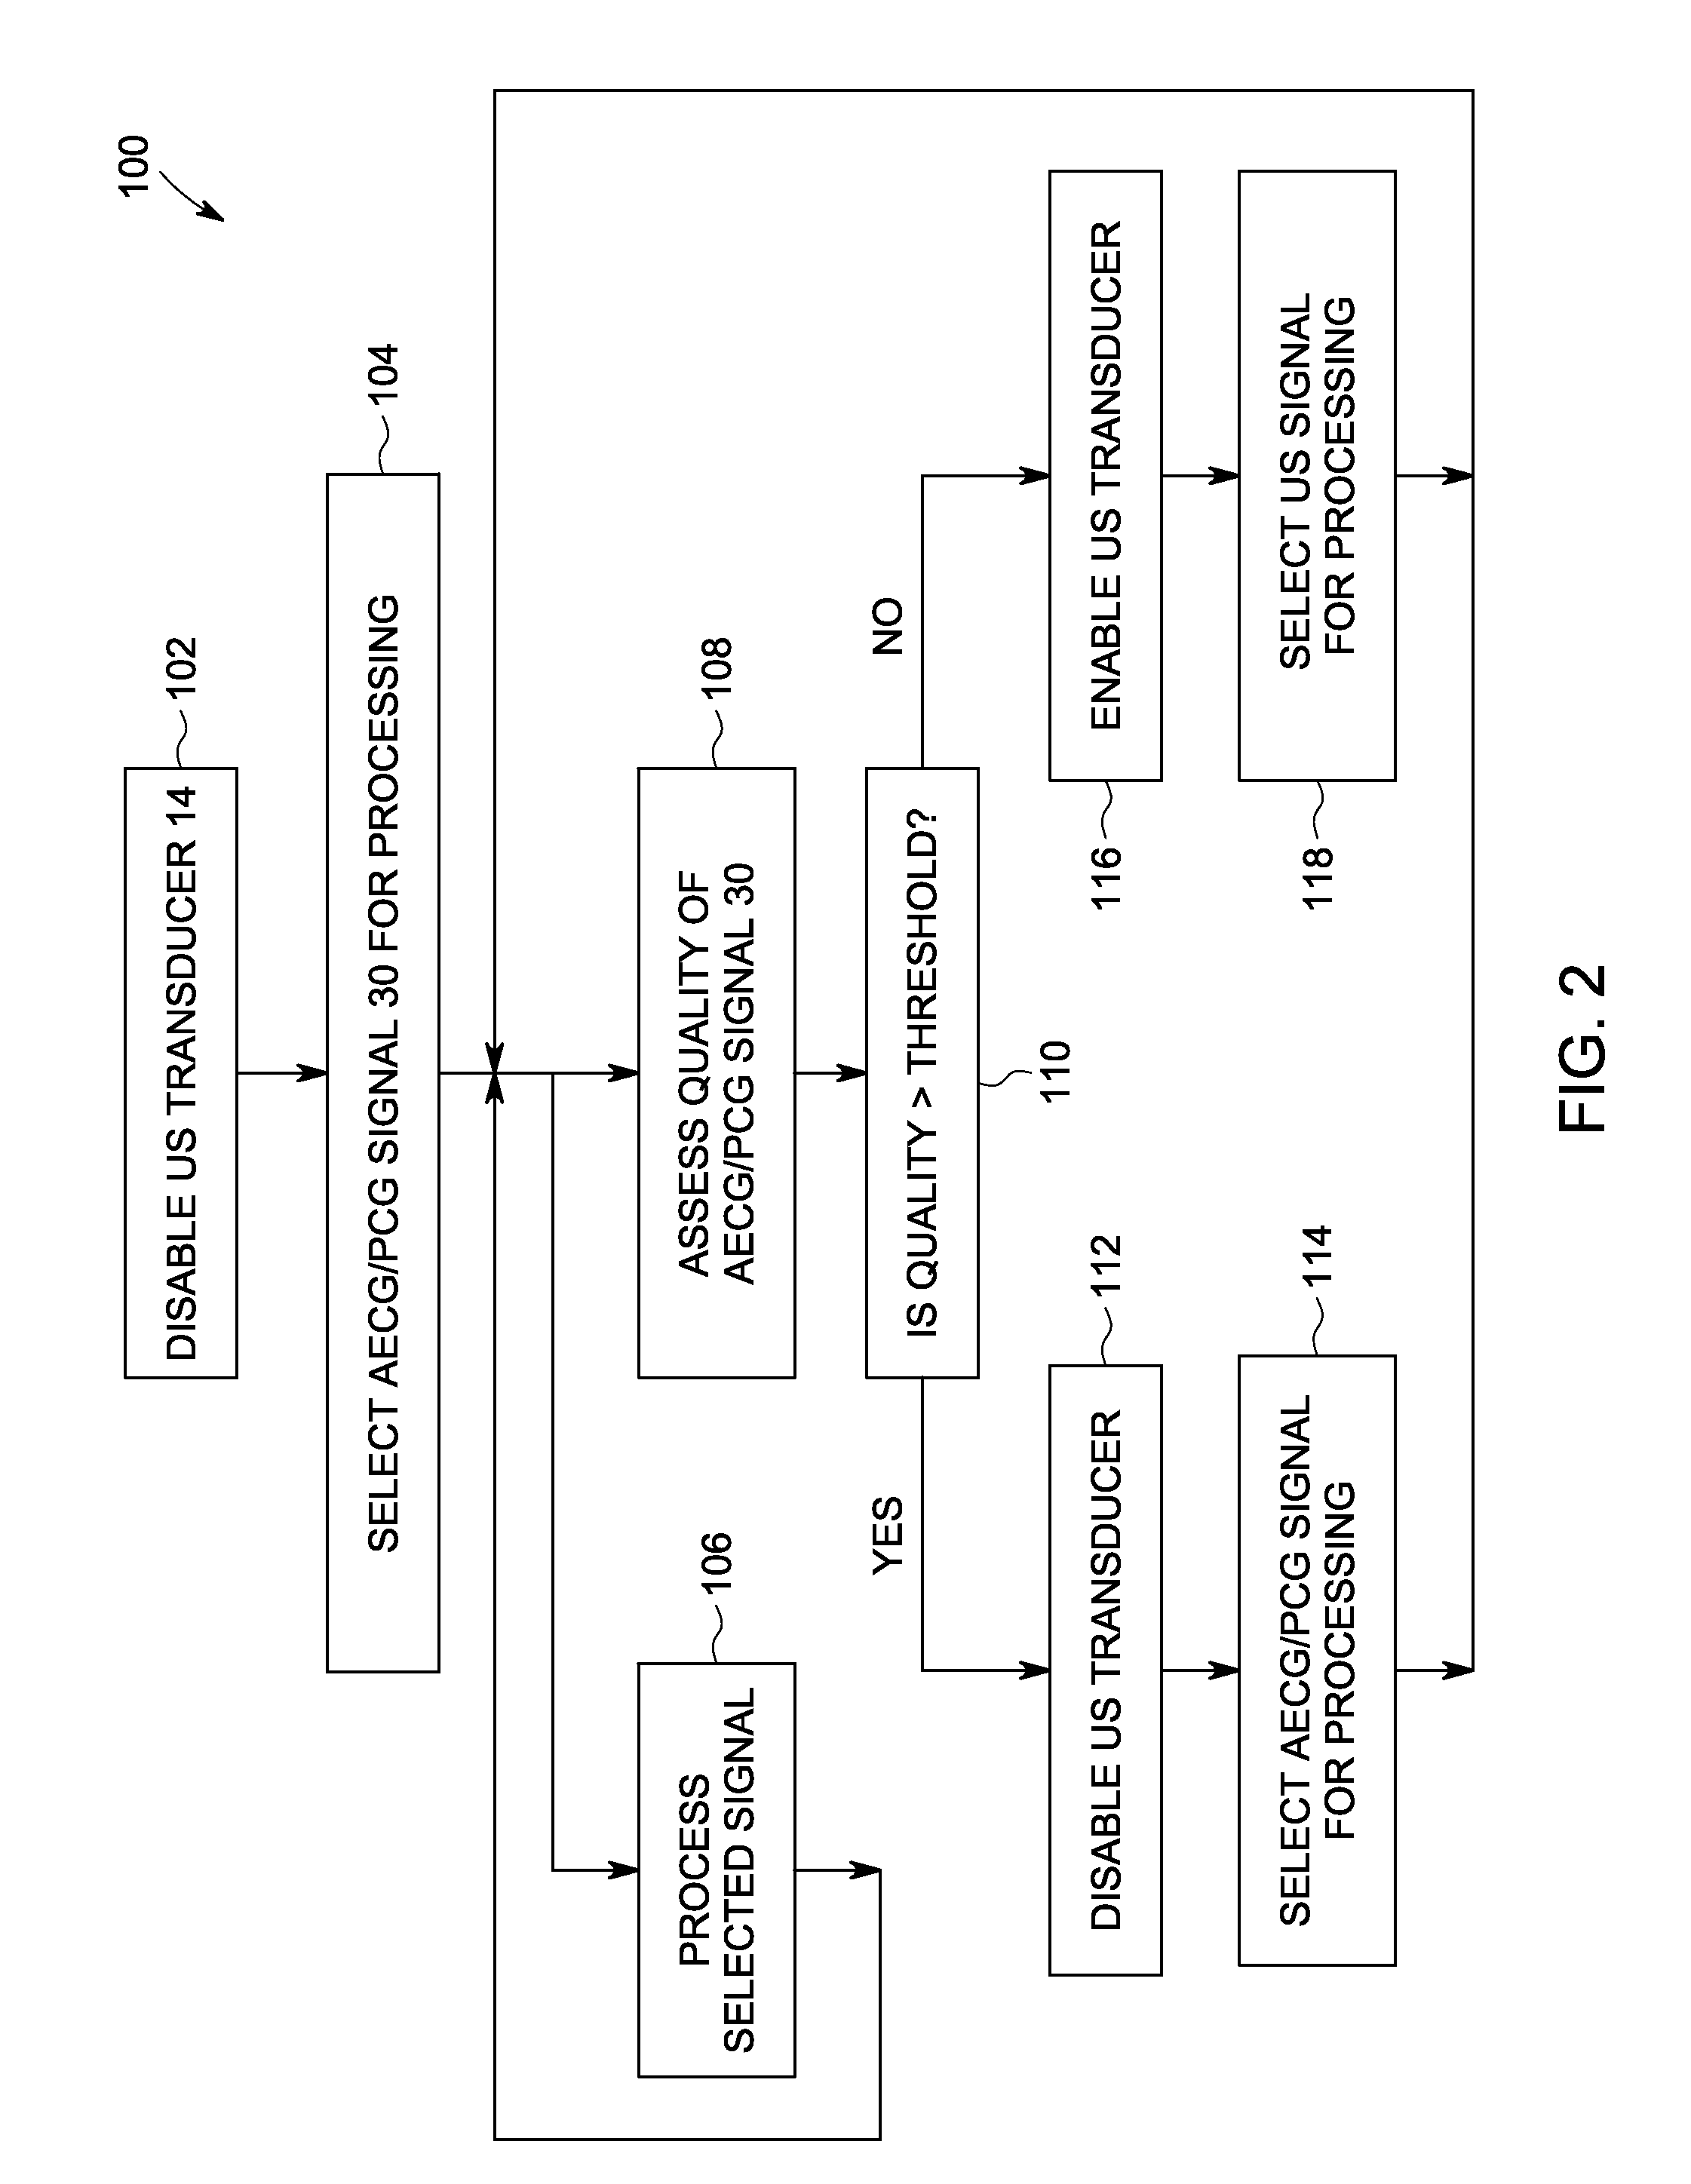 Fetal monitoring system and method